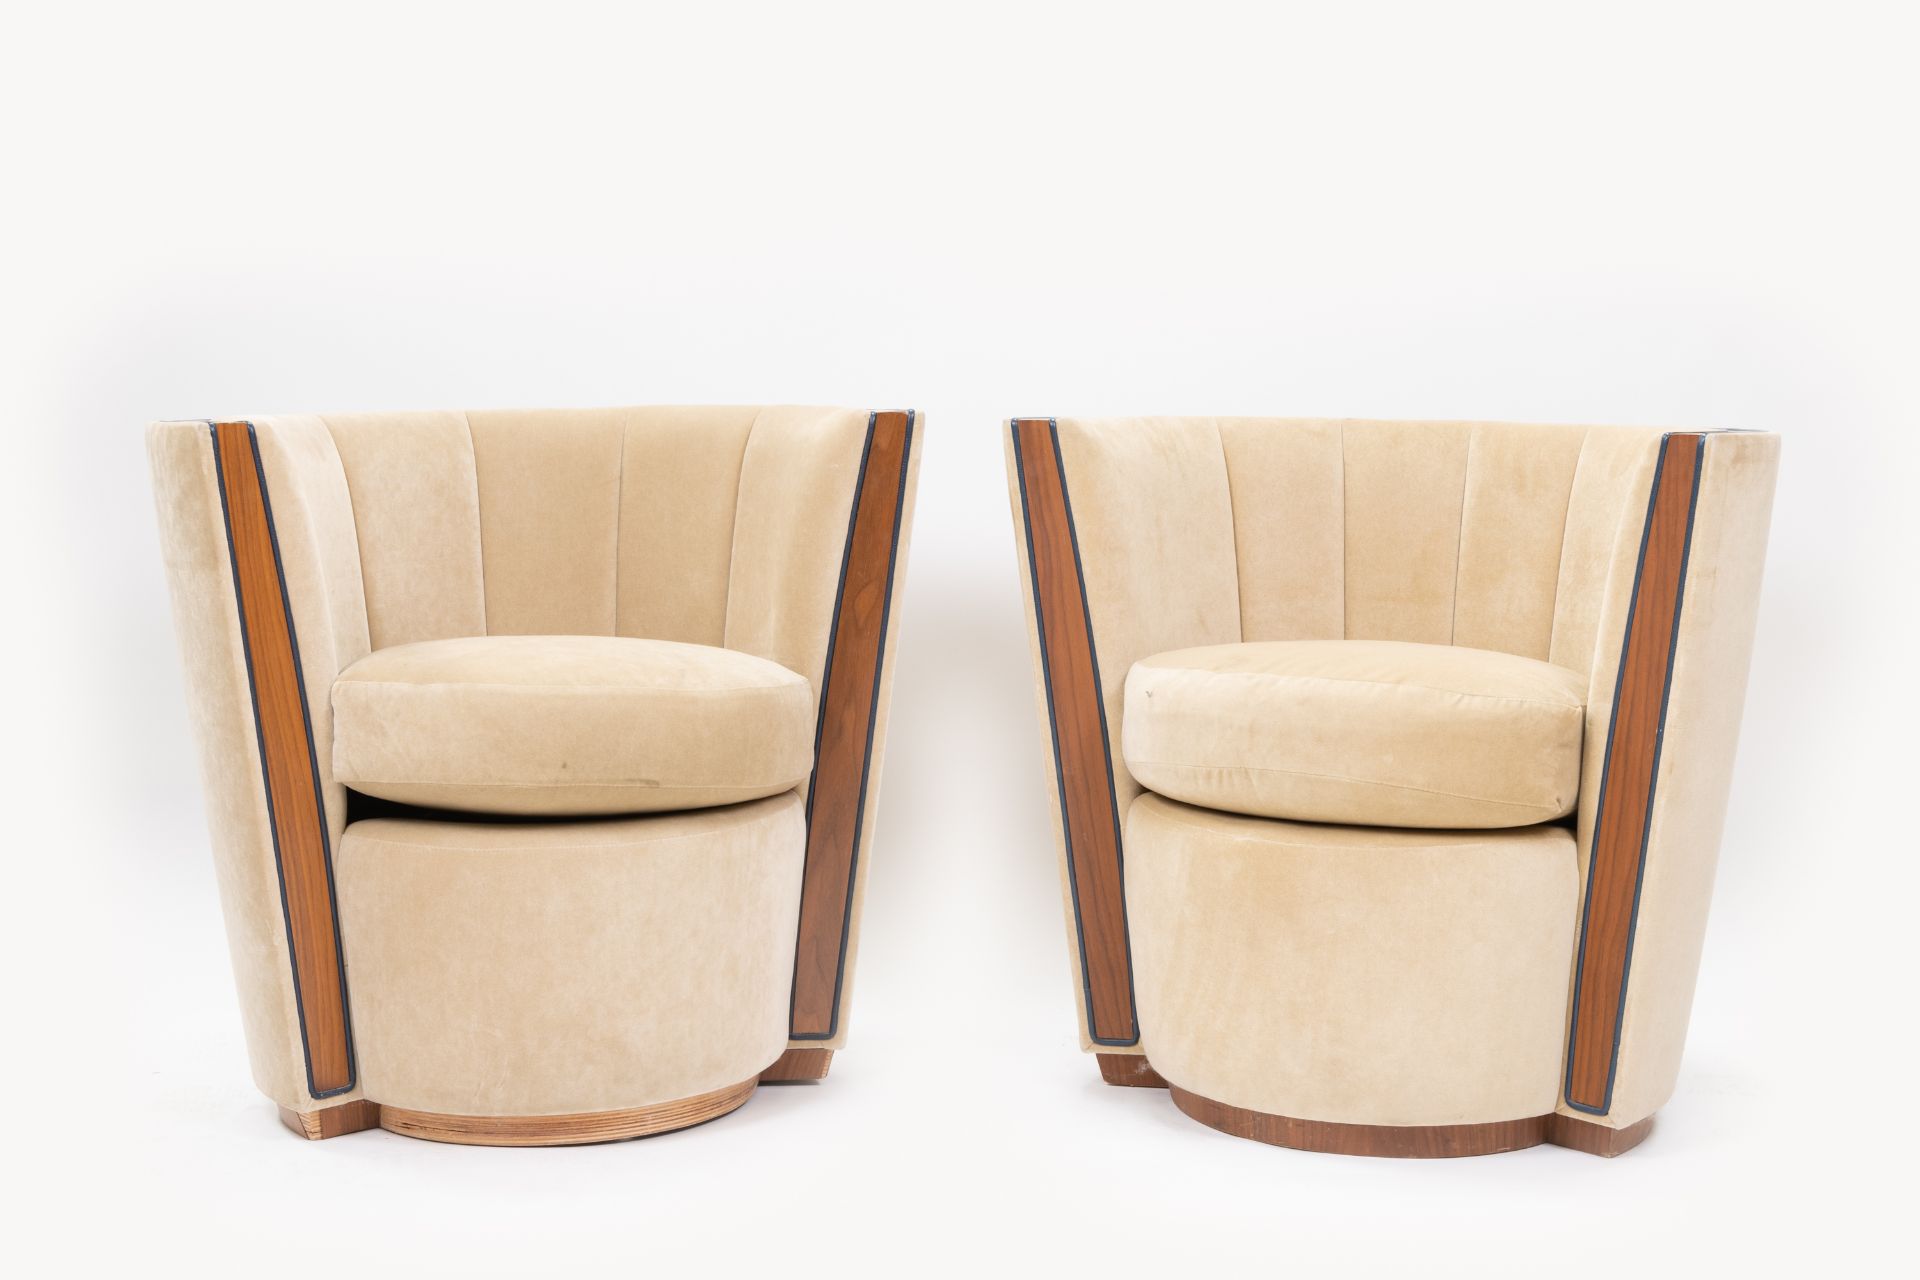 Pair of Bespoke Deco Tub Chairs Made for Claridge's by David Linley - Bild 2 aus 7